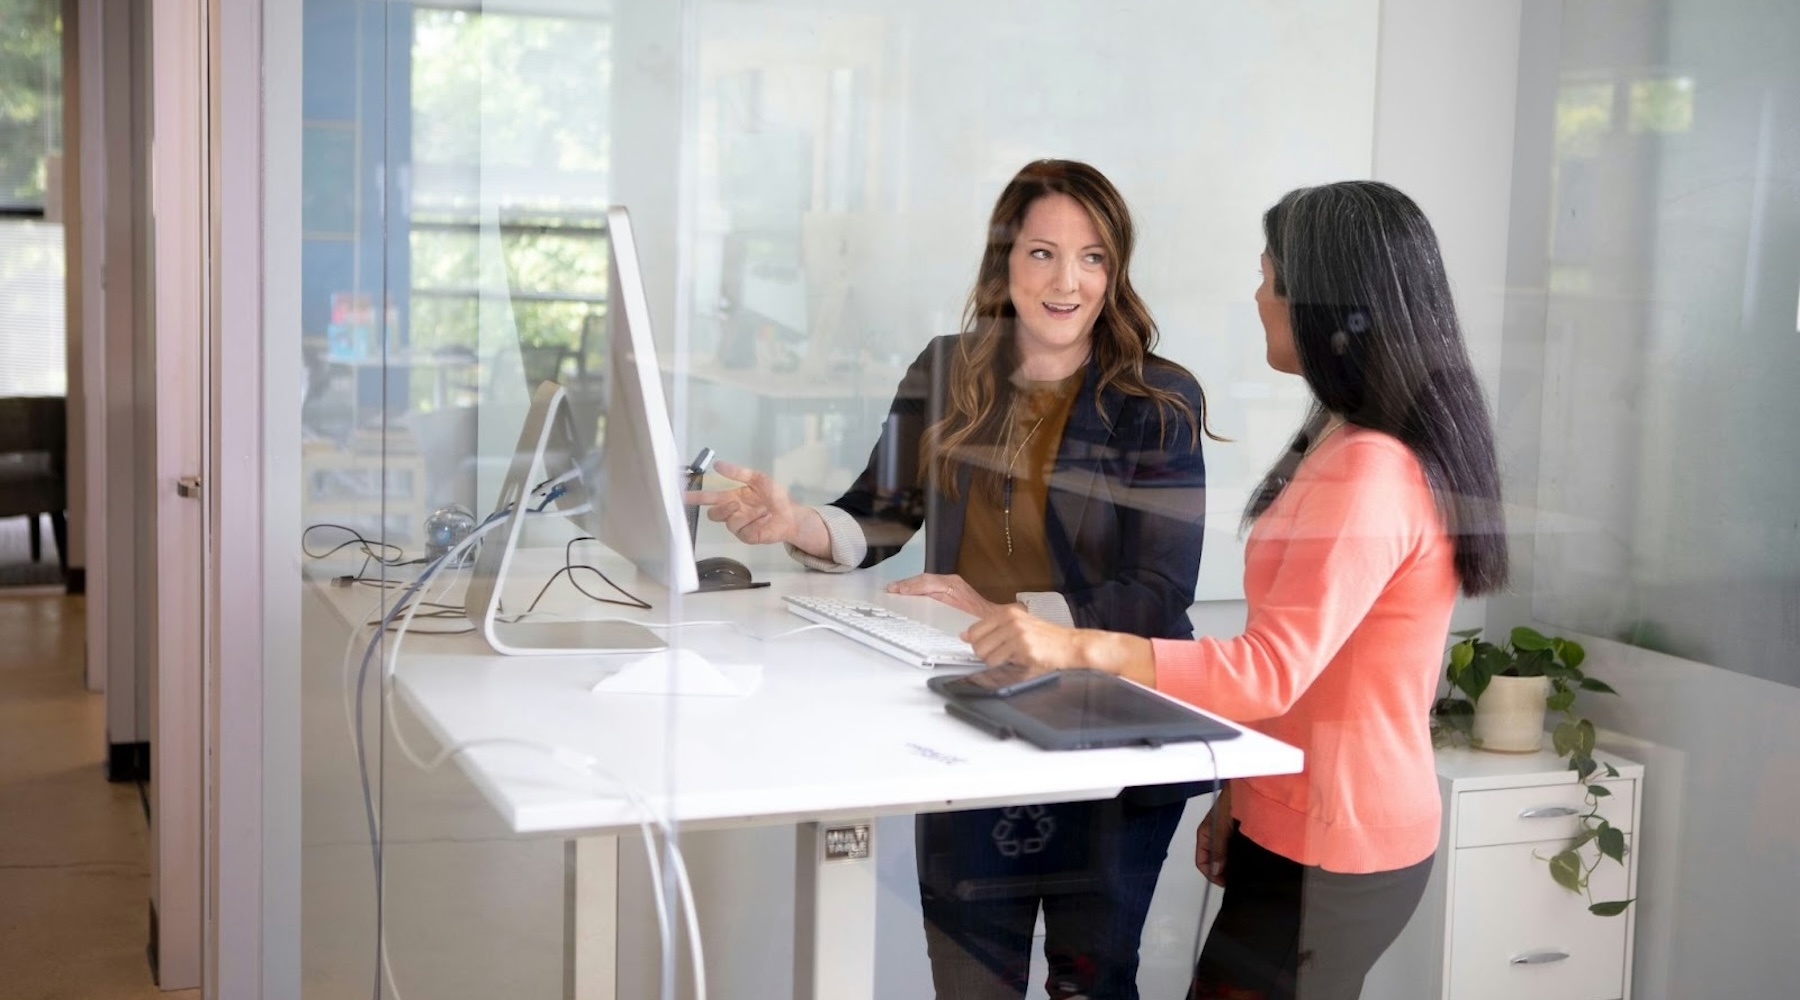 An image of an Executive Assistant working strategically with her executive at a standing desk in front of a computer.